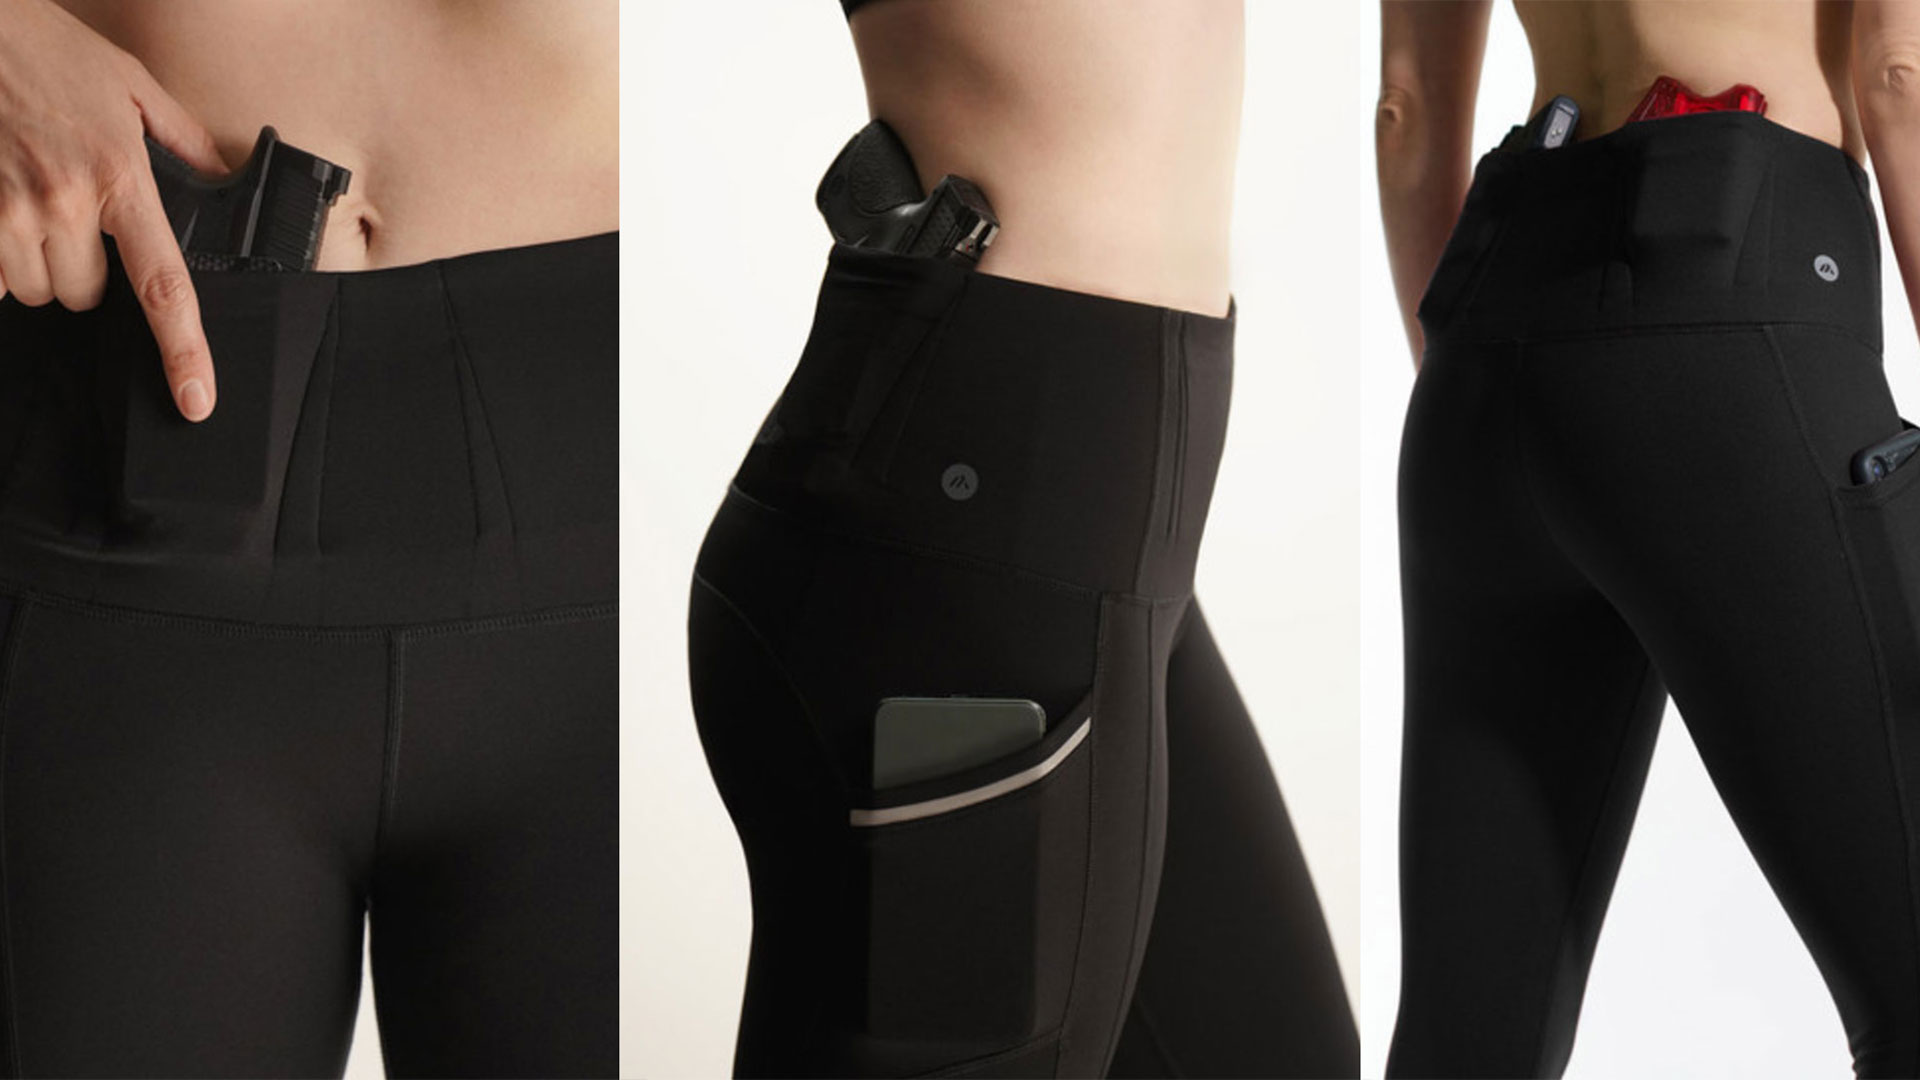 NRA Women  Primary Arms Unveils Alexo Athletica CCW Exercise Clothing